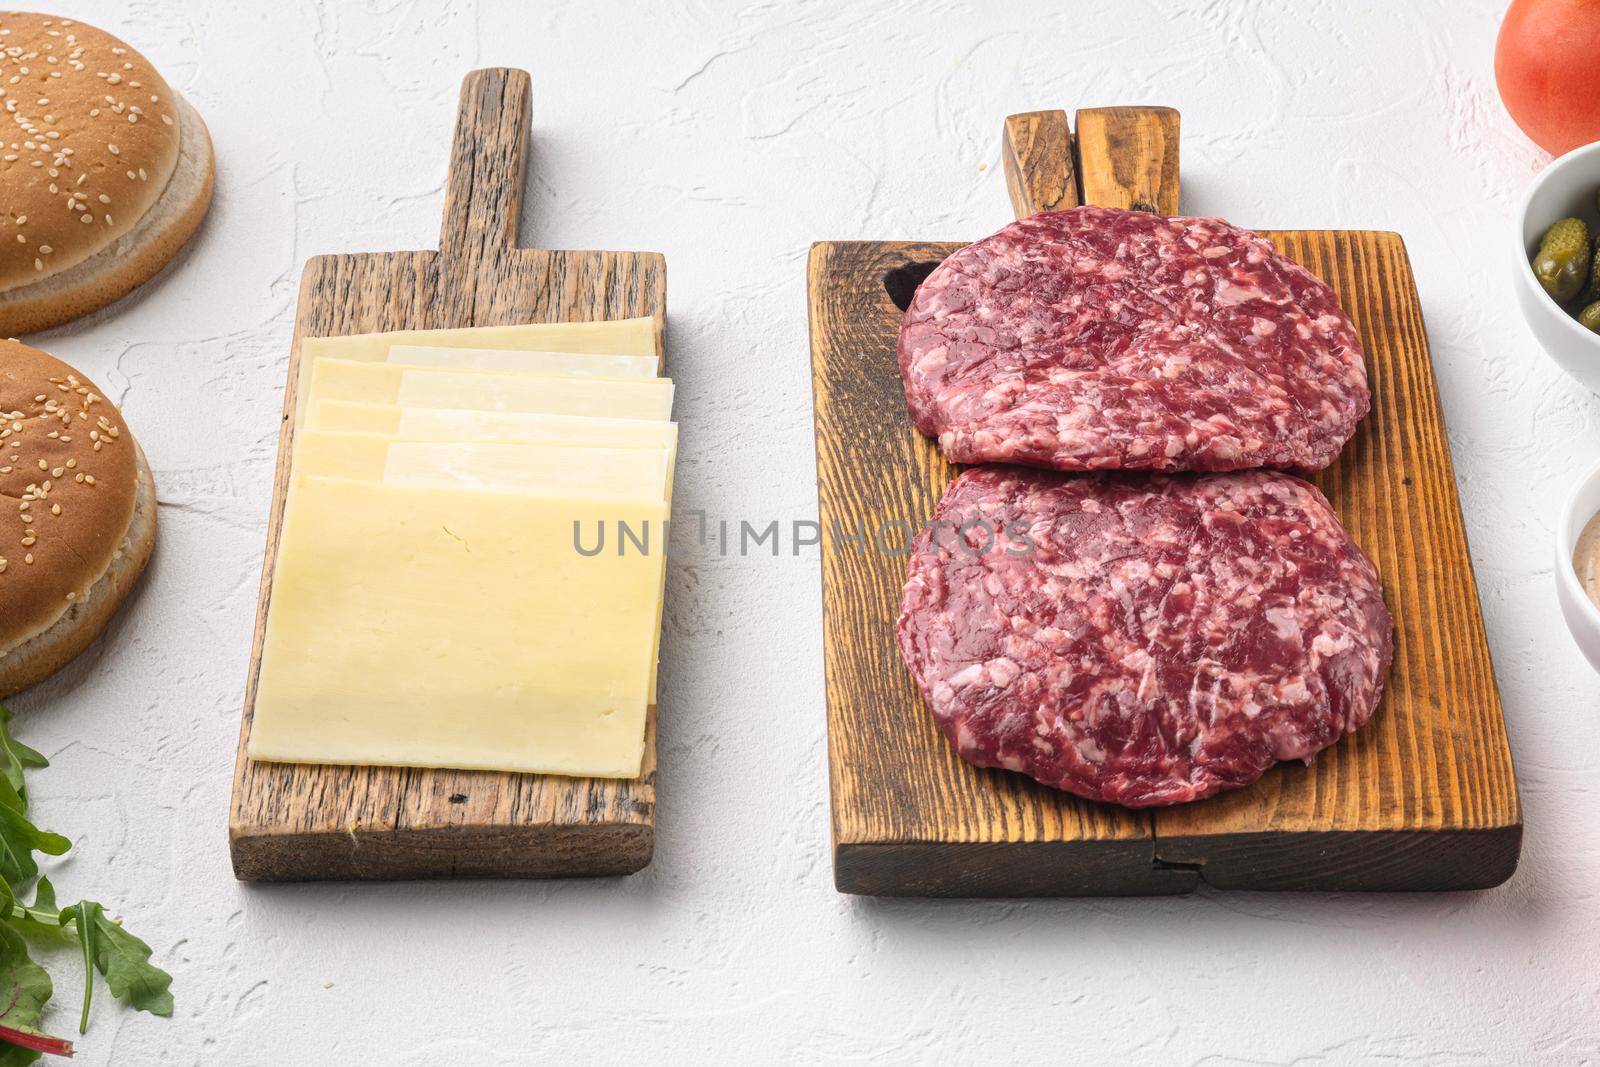 Ingredients for cooking burgers. Raw ground beef meat cutlets, on white stone background by Ilianesolenyi